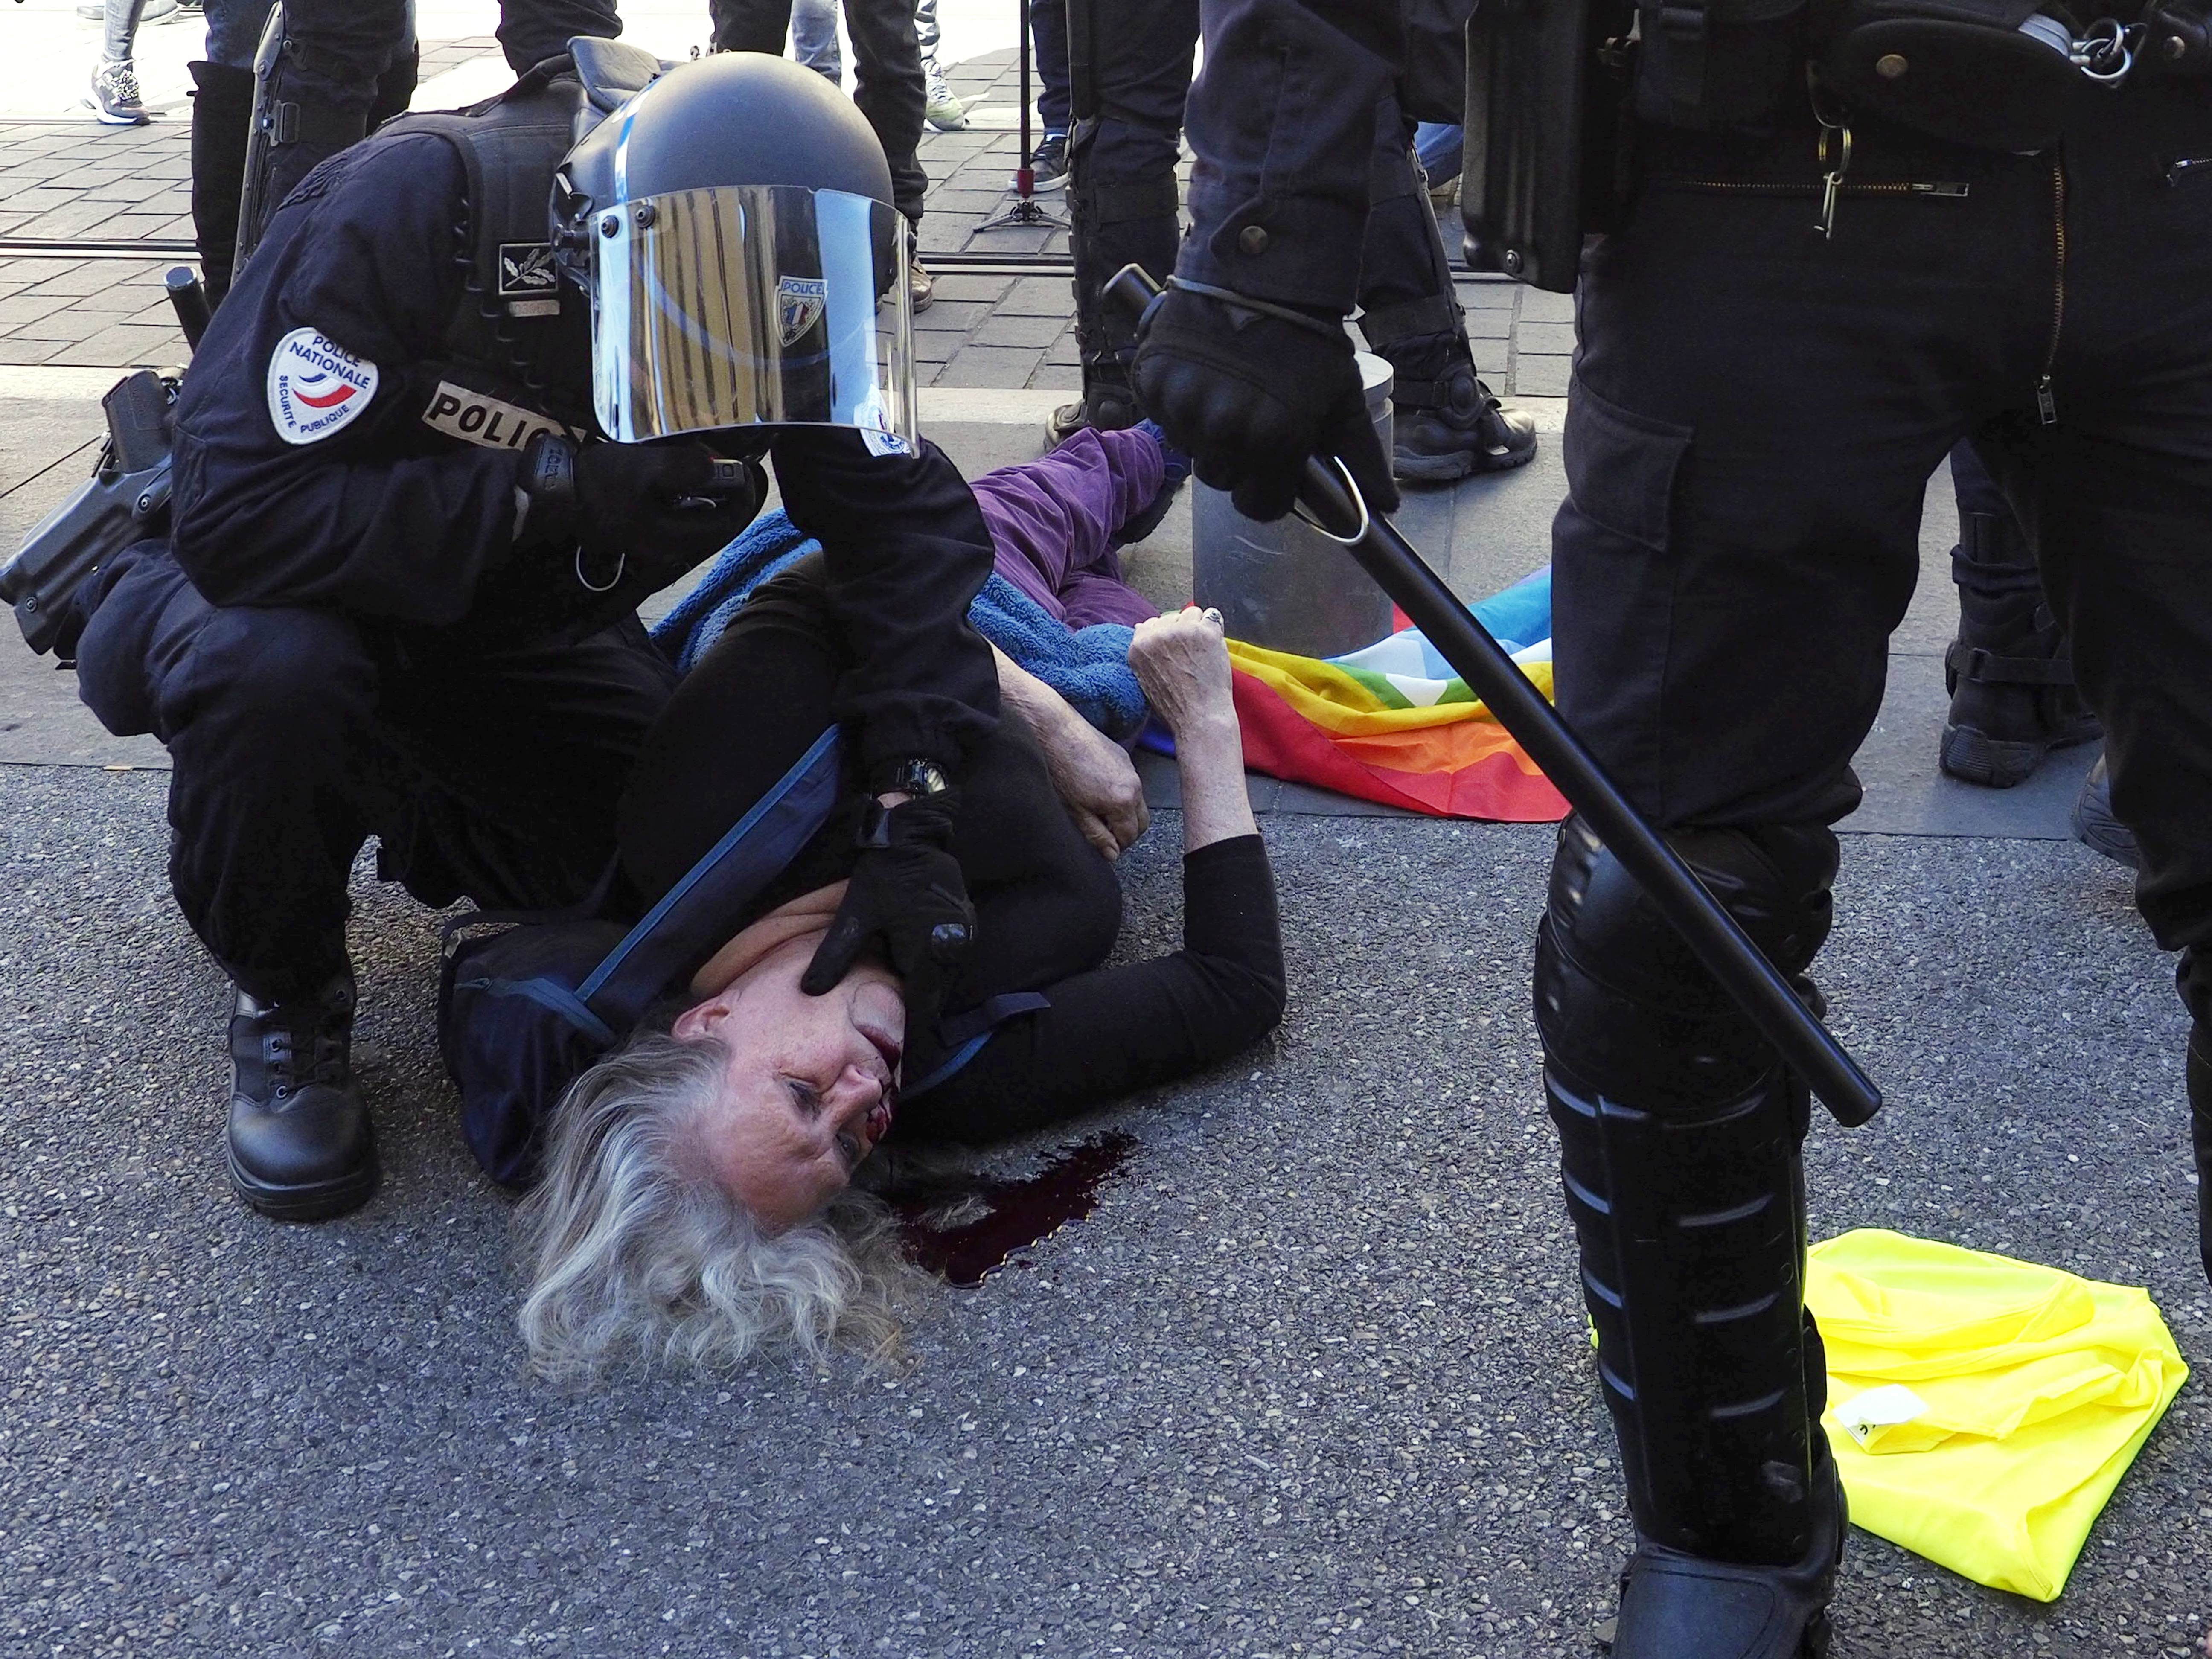 epa07457816 A bleeding woman lies on the floor after being injured during an assault by French Police forces during the 'Act XIX' demonstration (the 19th consecutive national protest on a Saturday) in Nice, France, 23 March 2019. To prevent a repeat of the last week riots on the Champs-Elysees, French authorities have banned demonstrations in large zones of different cities.  EPA/ARNOLD JEROCKI